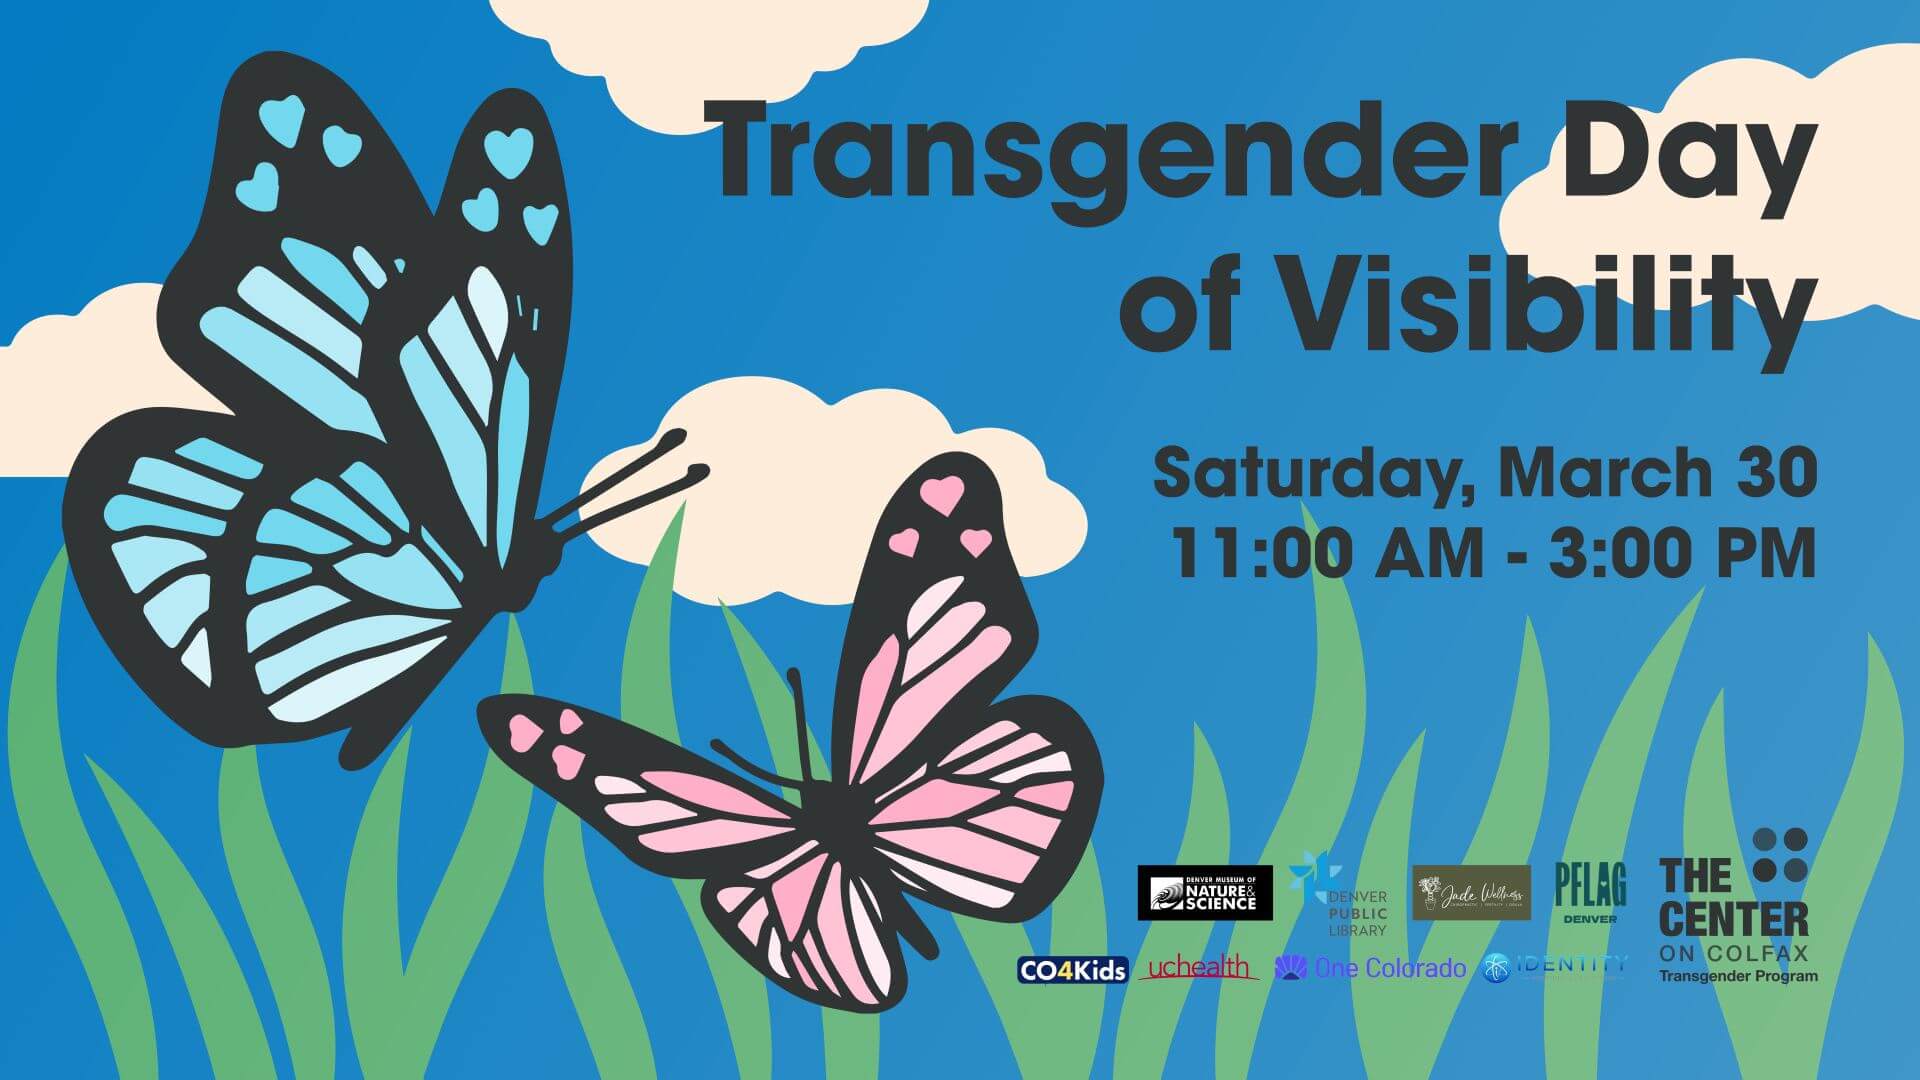 Blue and pink butterflies flying over green grass and a dark blue sky with white clouds. The words "Transgender Day of Visibility, Saturday, March 30, 11:00 AM - 3:00 PM" appear over the background.